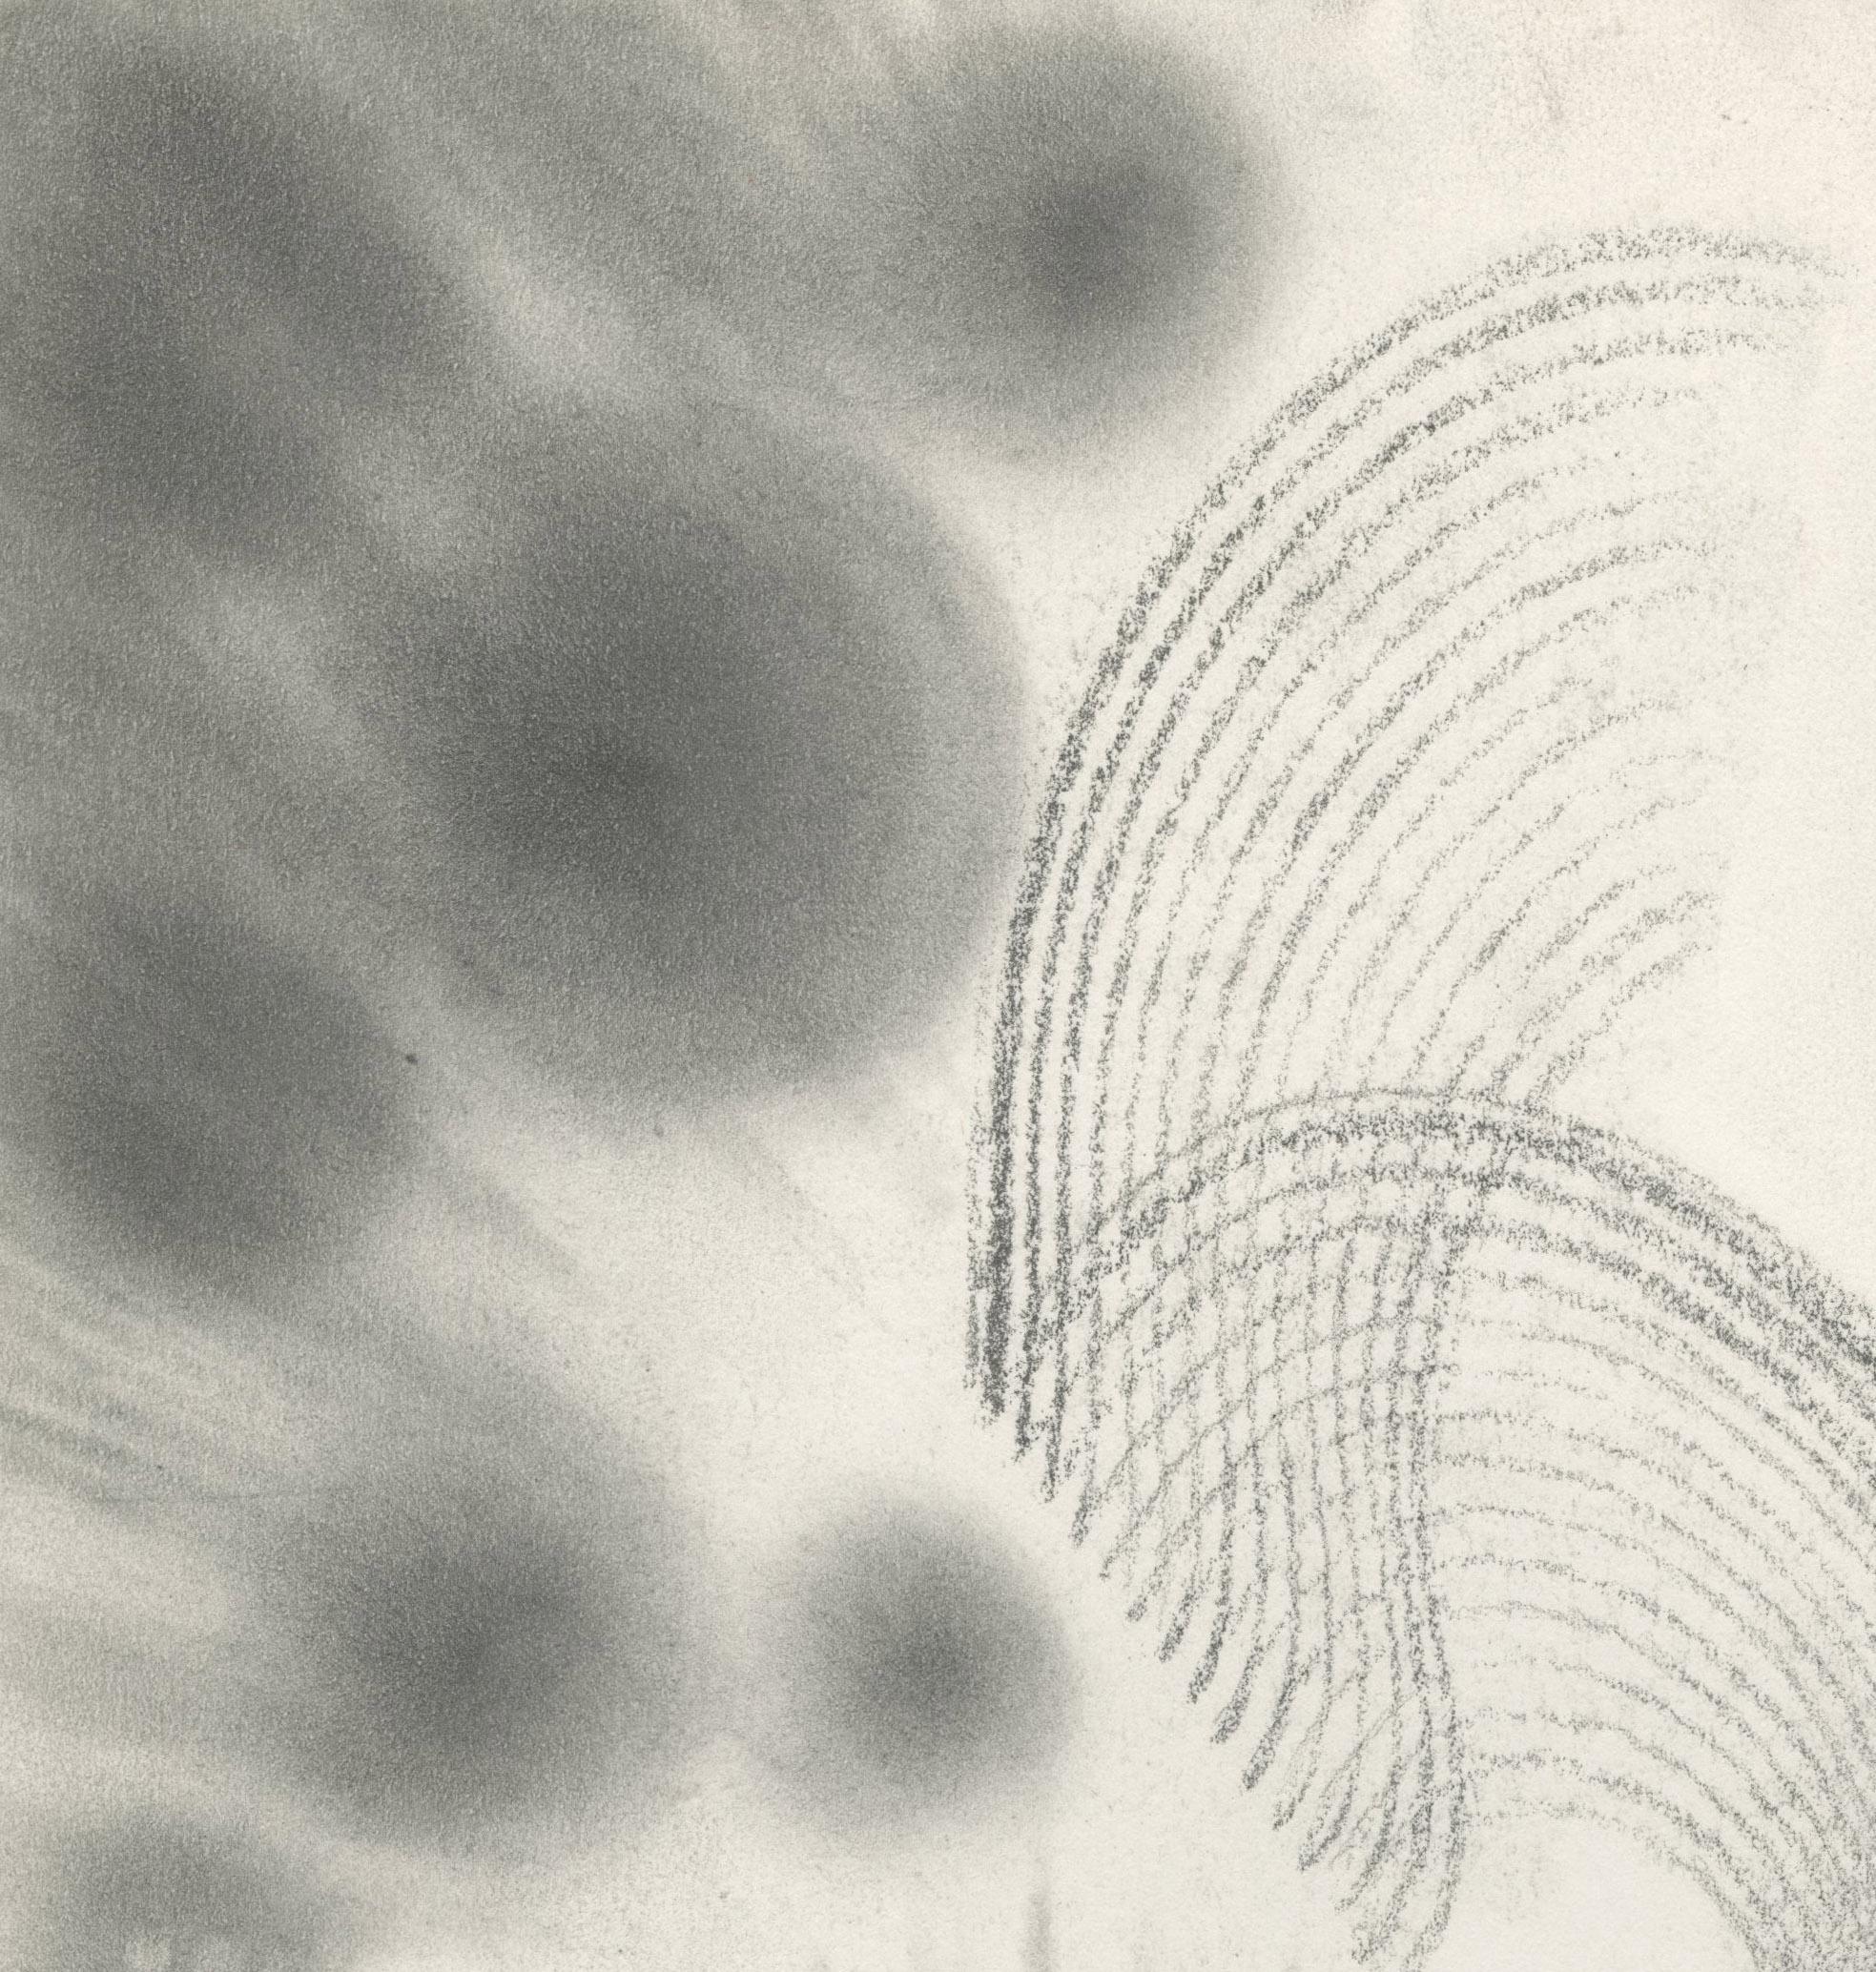 Untitled Abstraction - Gray Abstract Drawing by Medard P. Klein